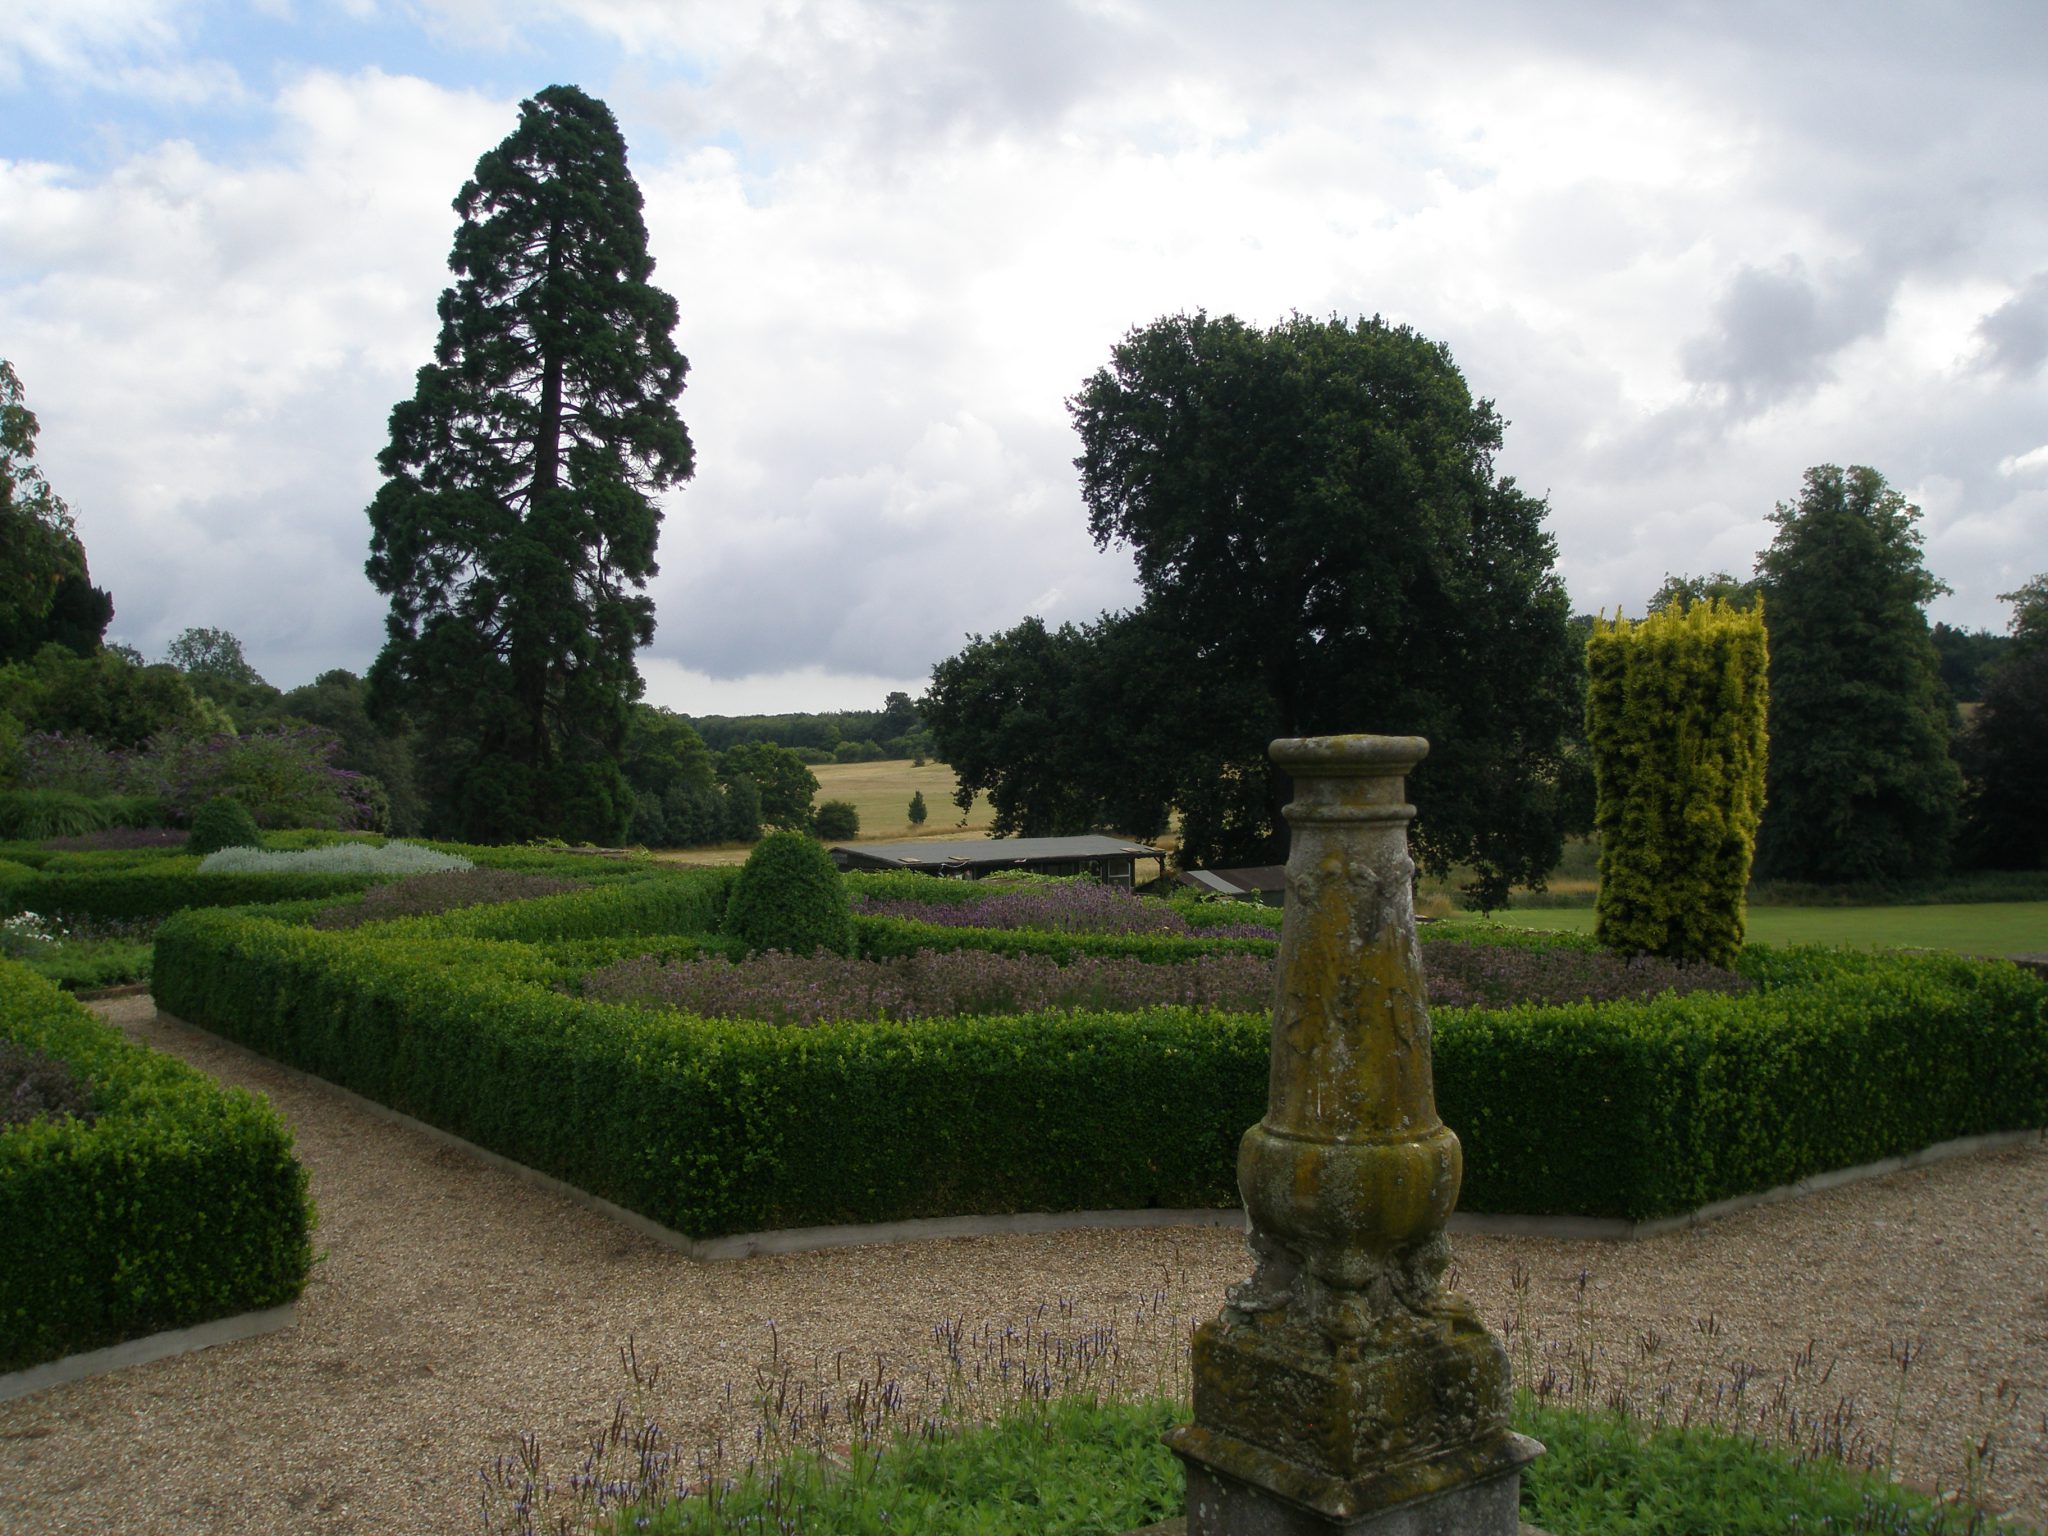 A mossy, marble column is mounted at the center of the Parterre.